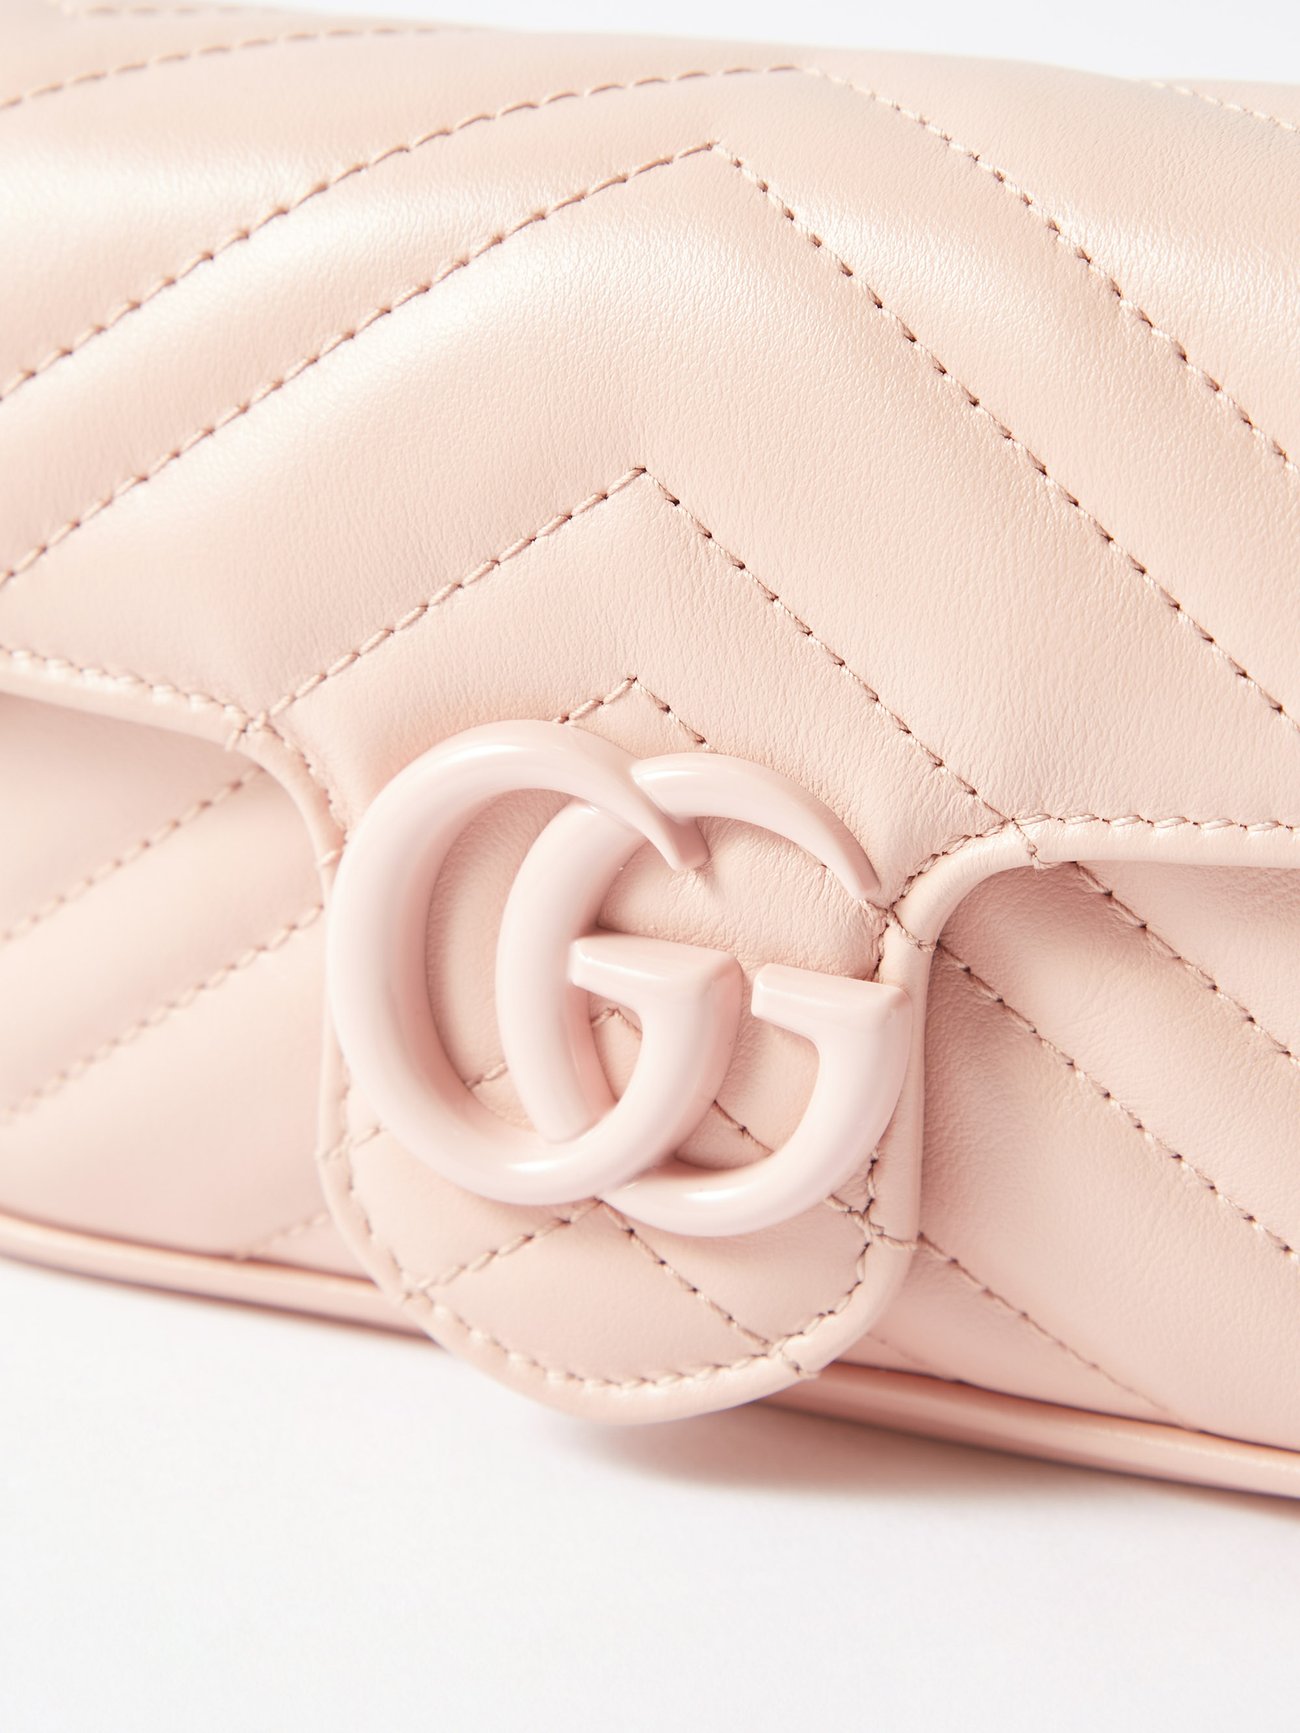 Pink GG Marmont quilted leather cross-body bag, Gucci